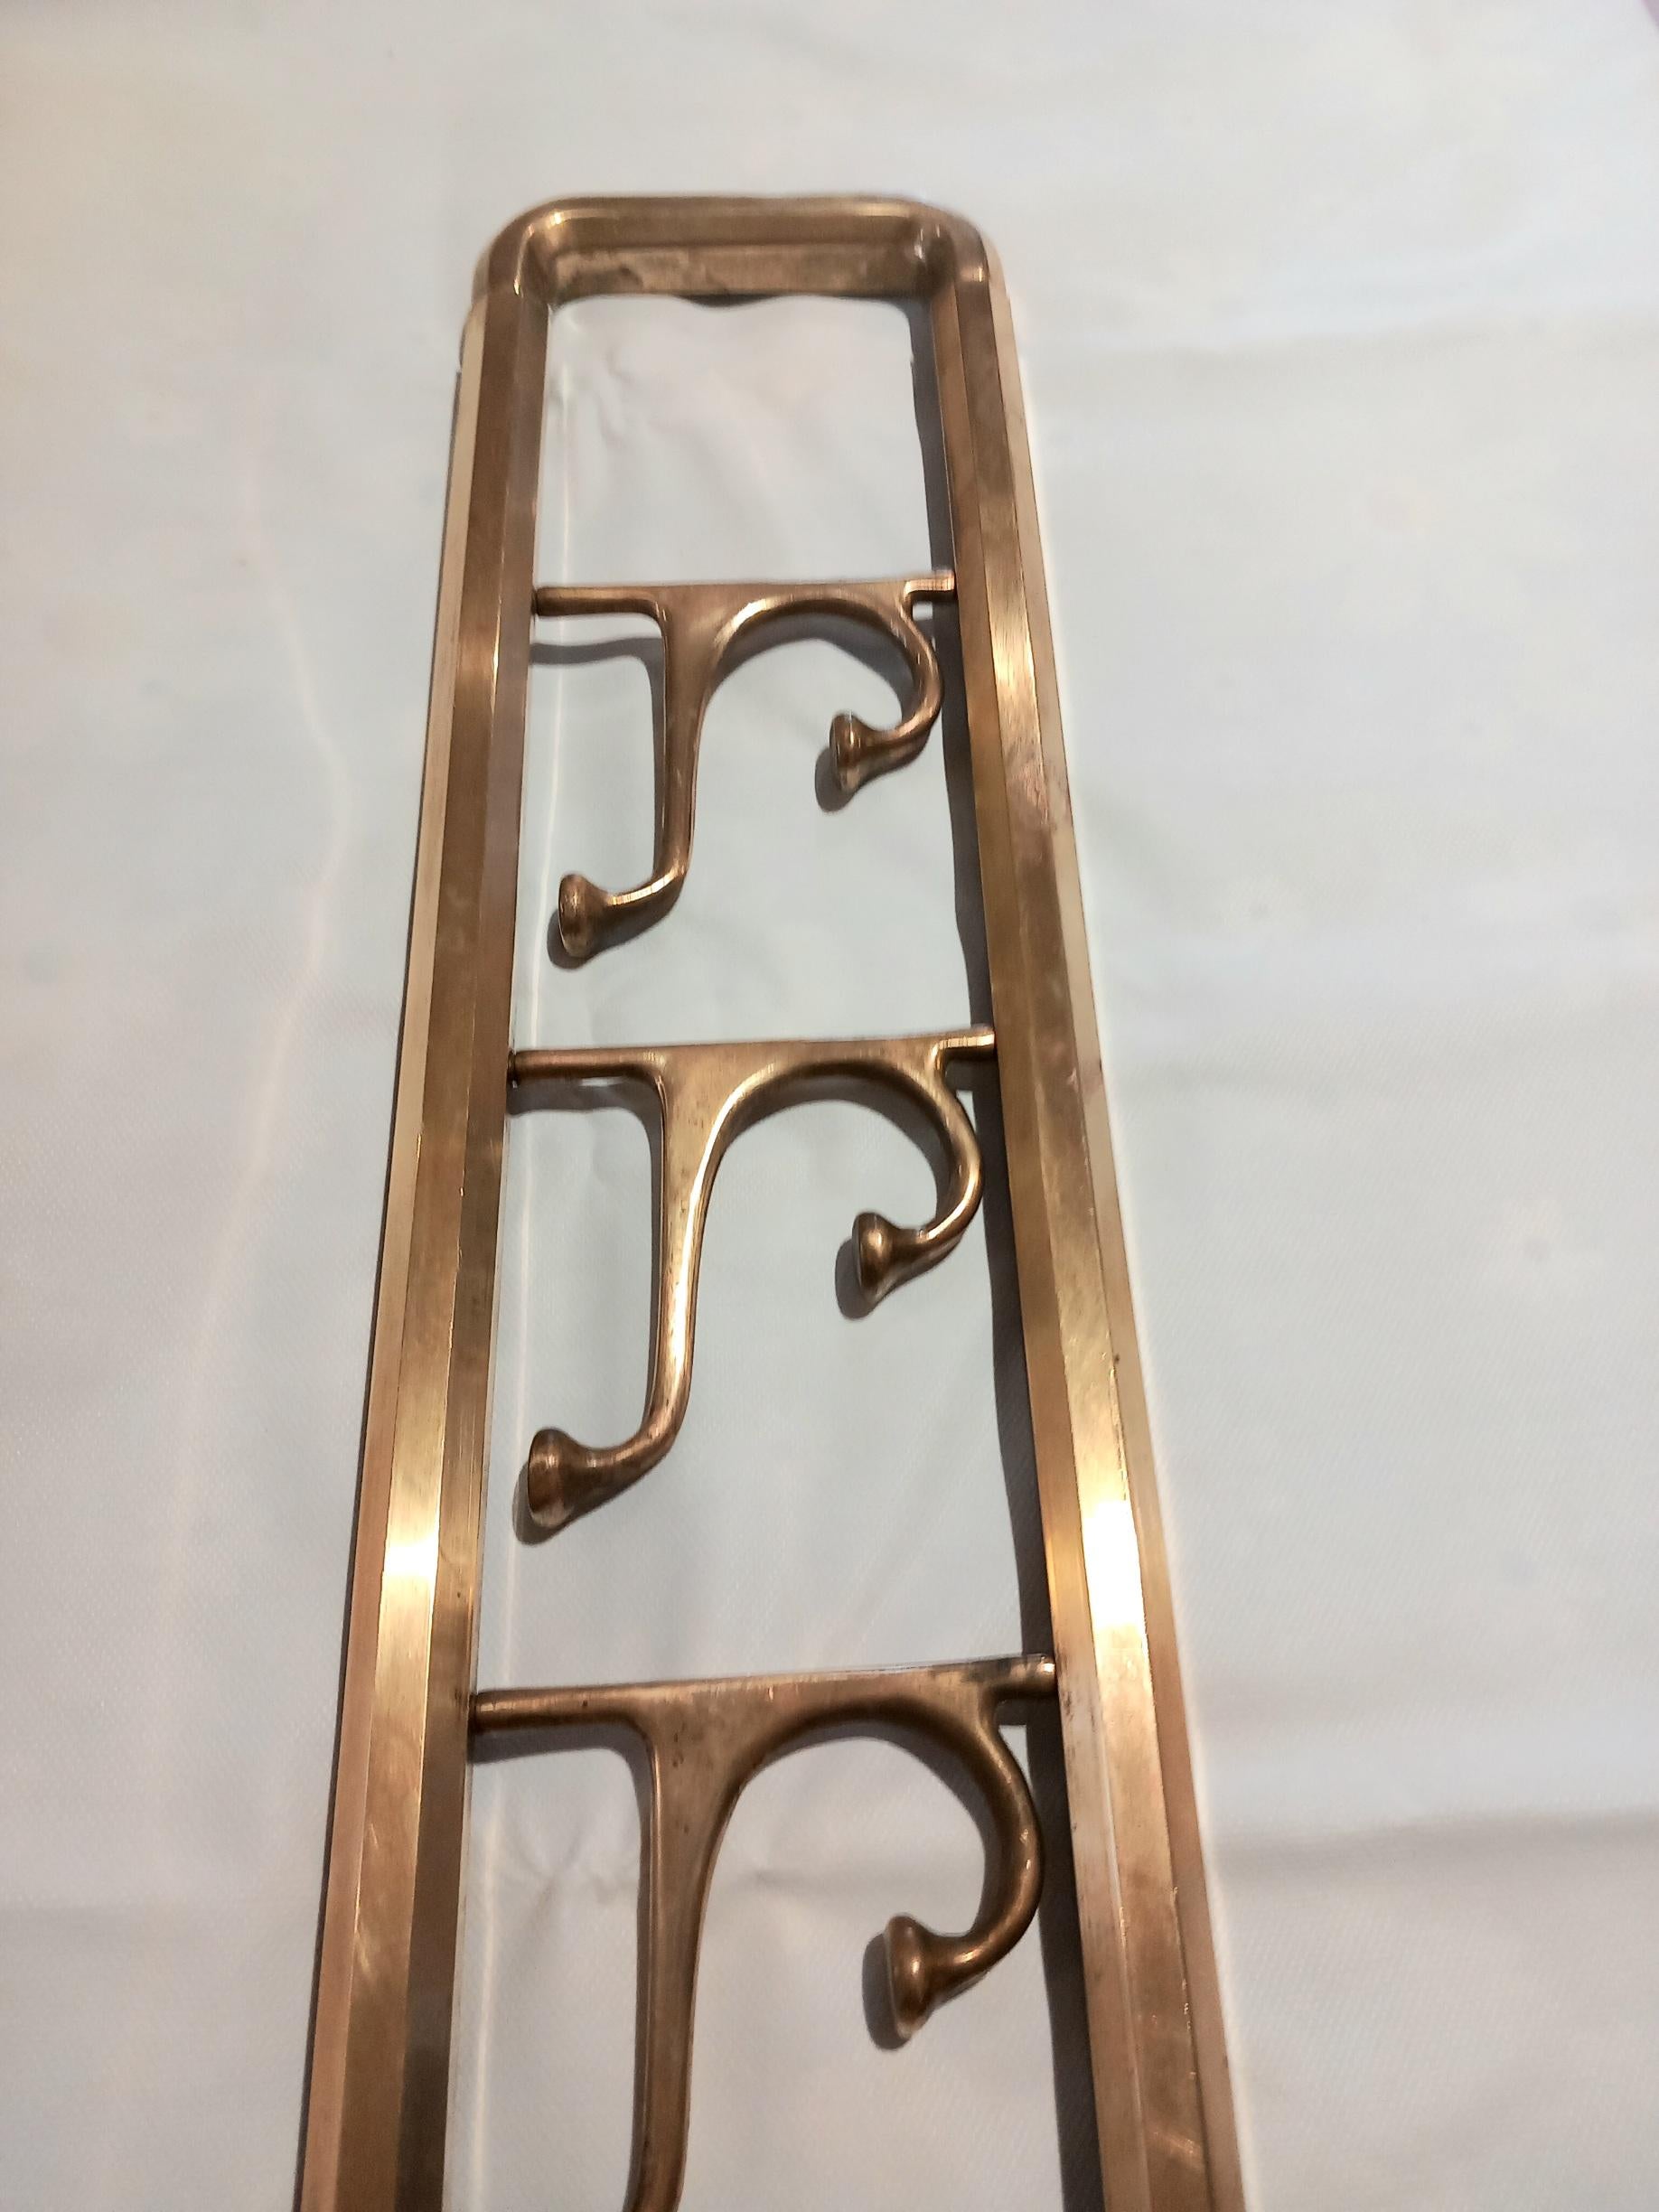 Art Deco foldable wall coat rack in brass.

Foldable with three hangers

Very Excellent vintage condition.

The last photo belongs to another that we also have for sale and that has a beautiful polished brass

In this case we have kept the